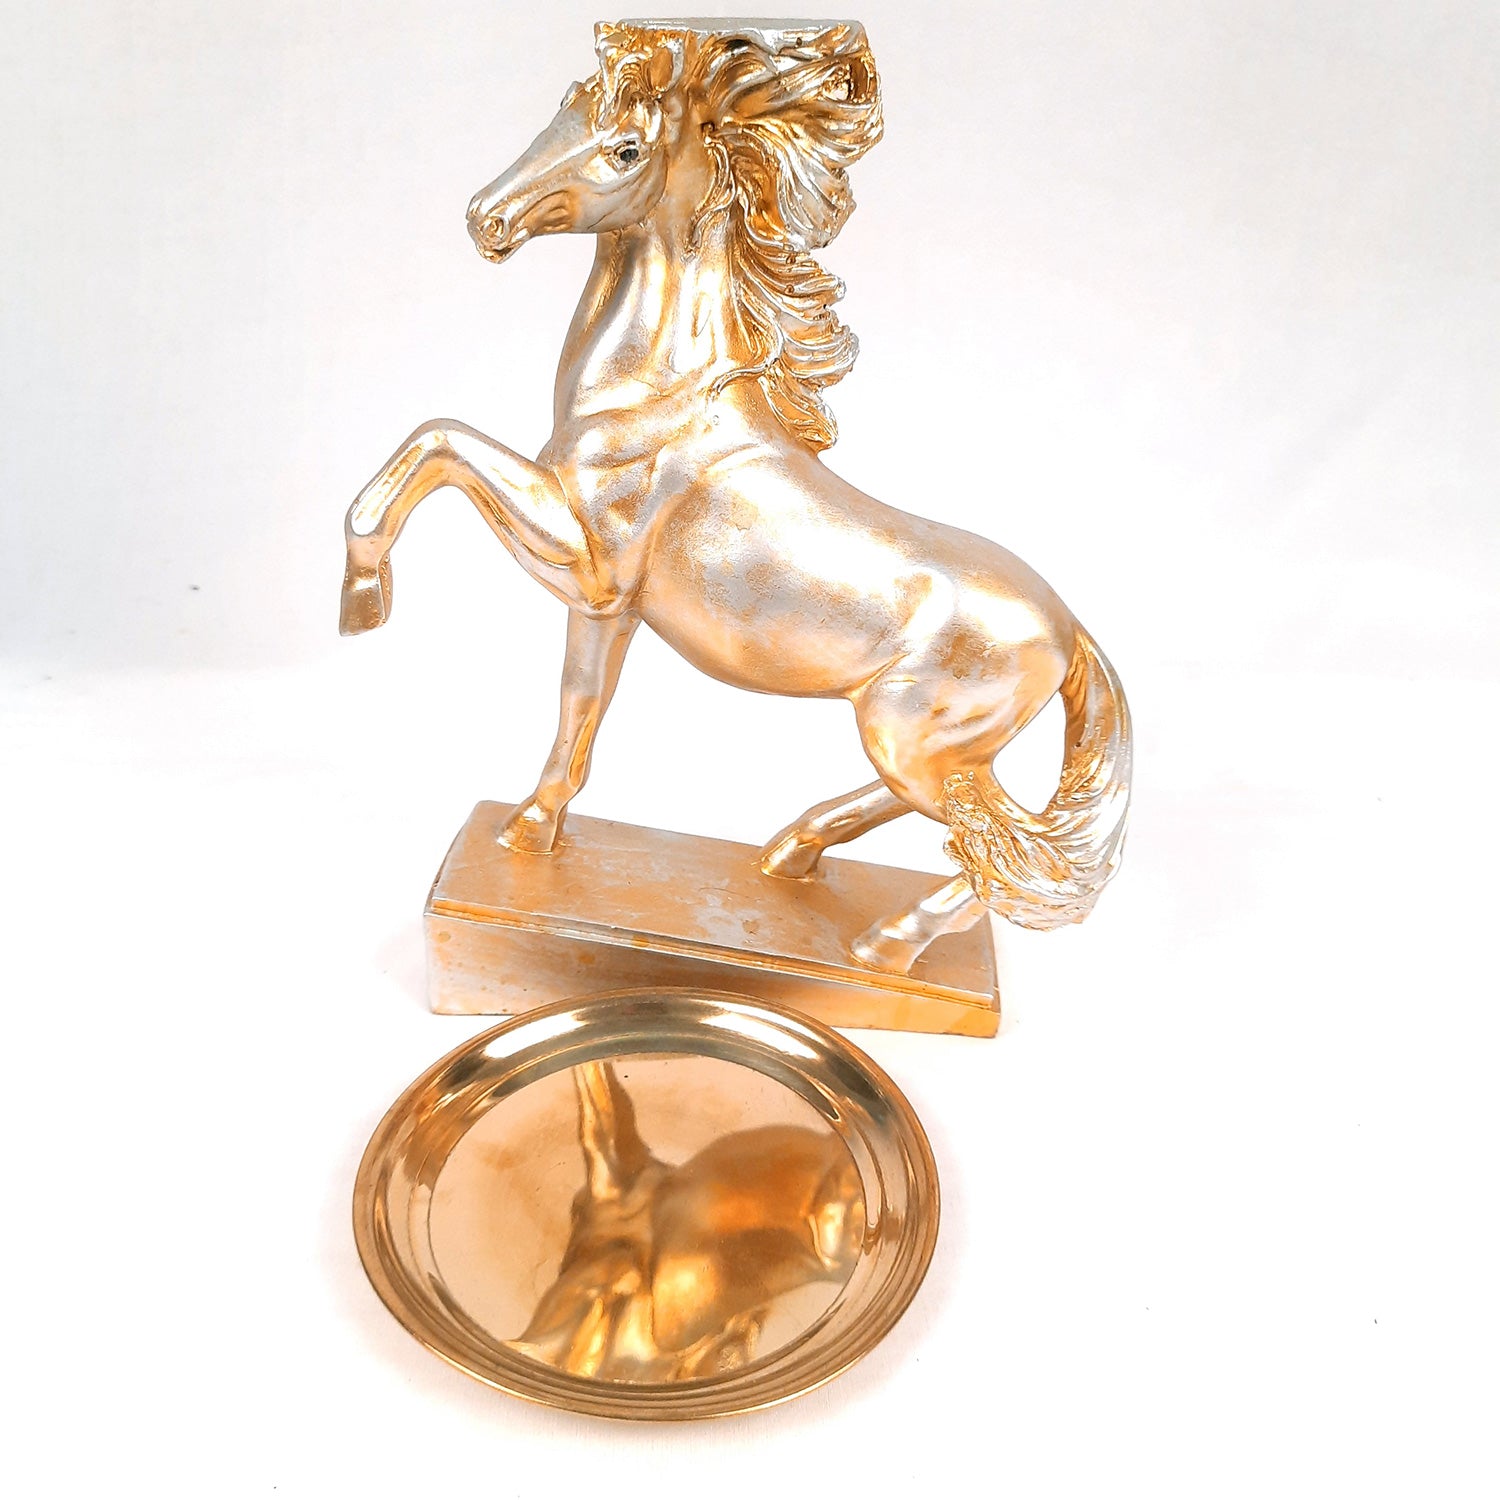 Horse Statue With Detachable Tray For Keeping Small Plant / Chocolates | Horse Showpiece - for Home, Table, Shelf, Good Luck, Vastu & Office Desk Decor - 10 Inch - Apkamart